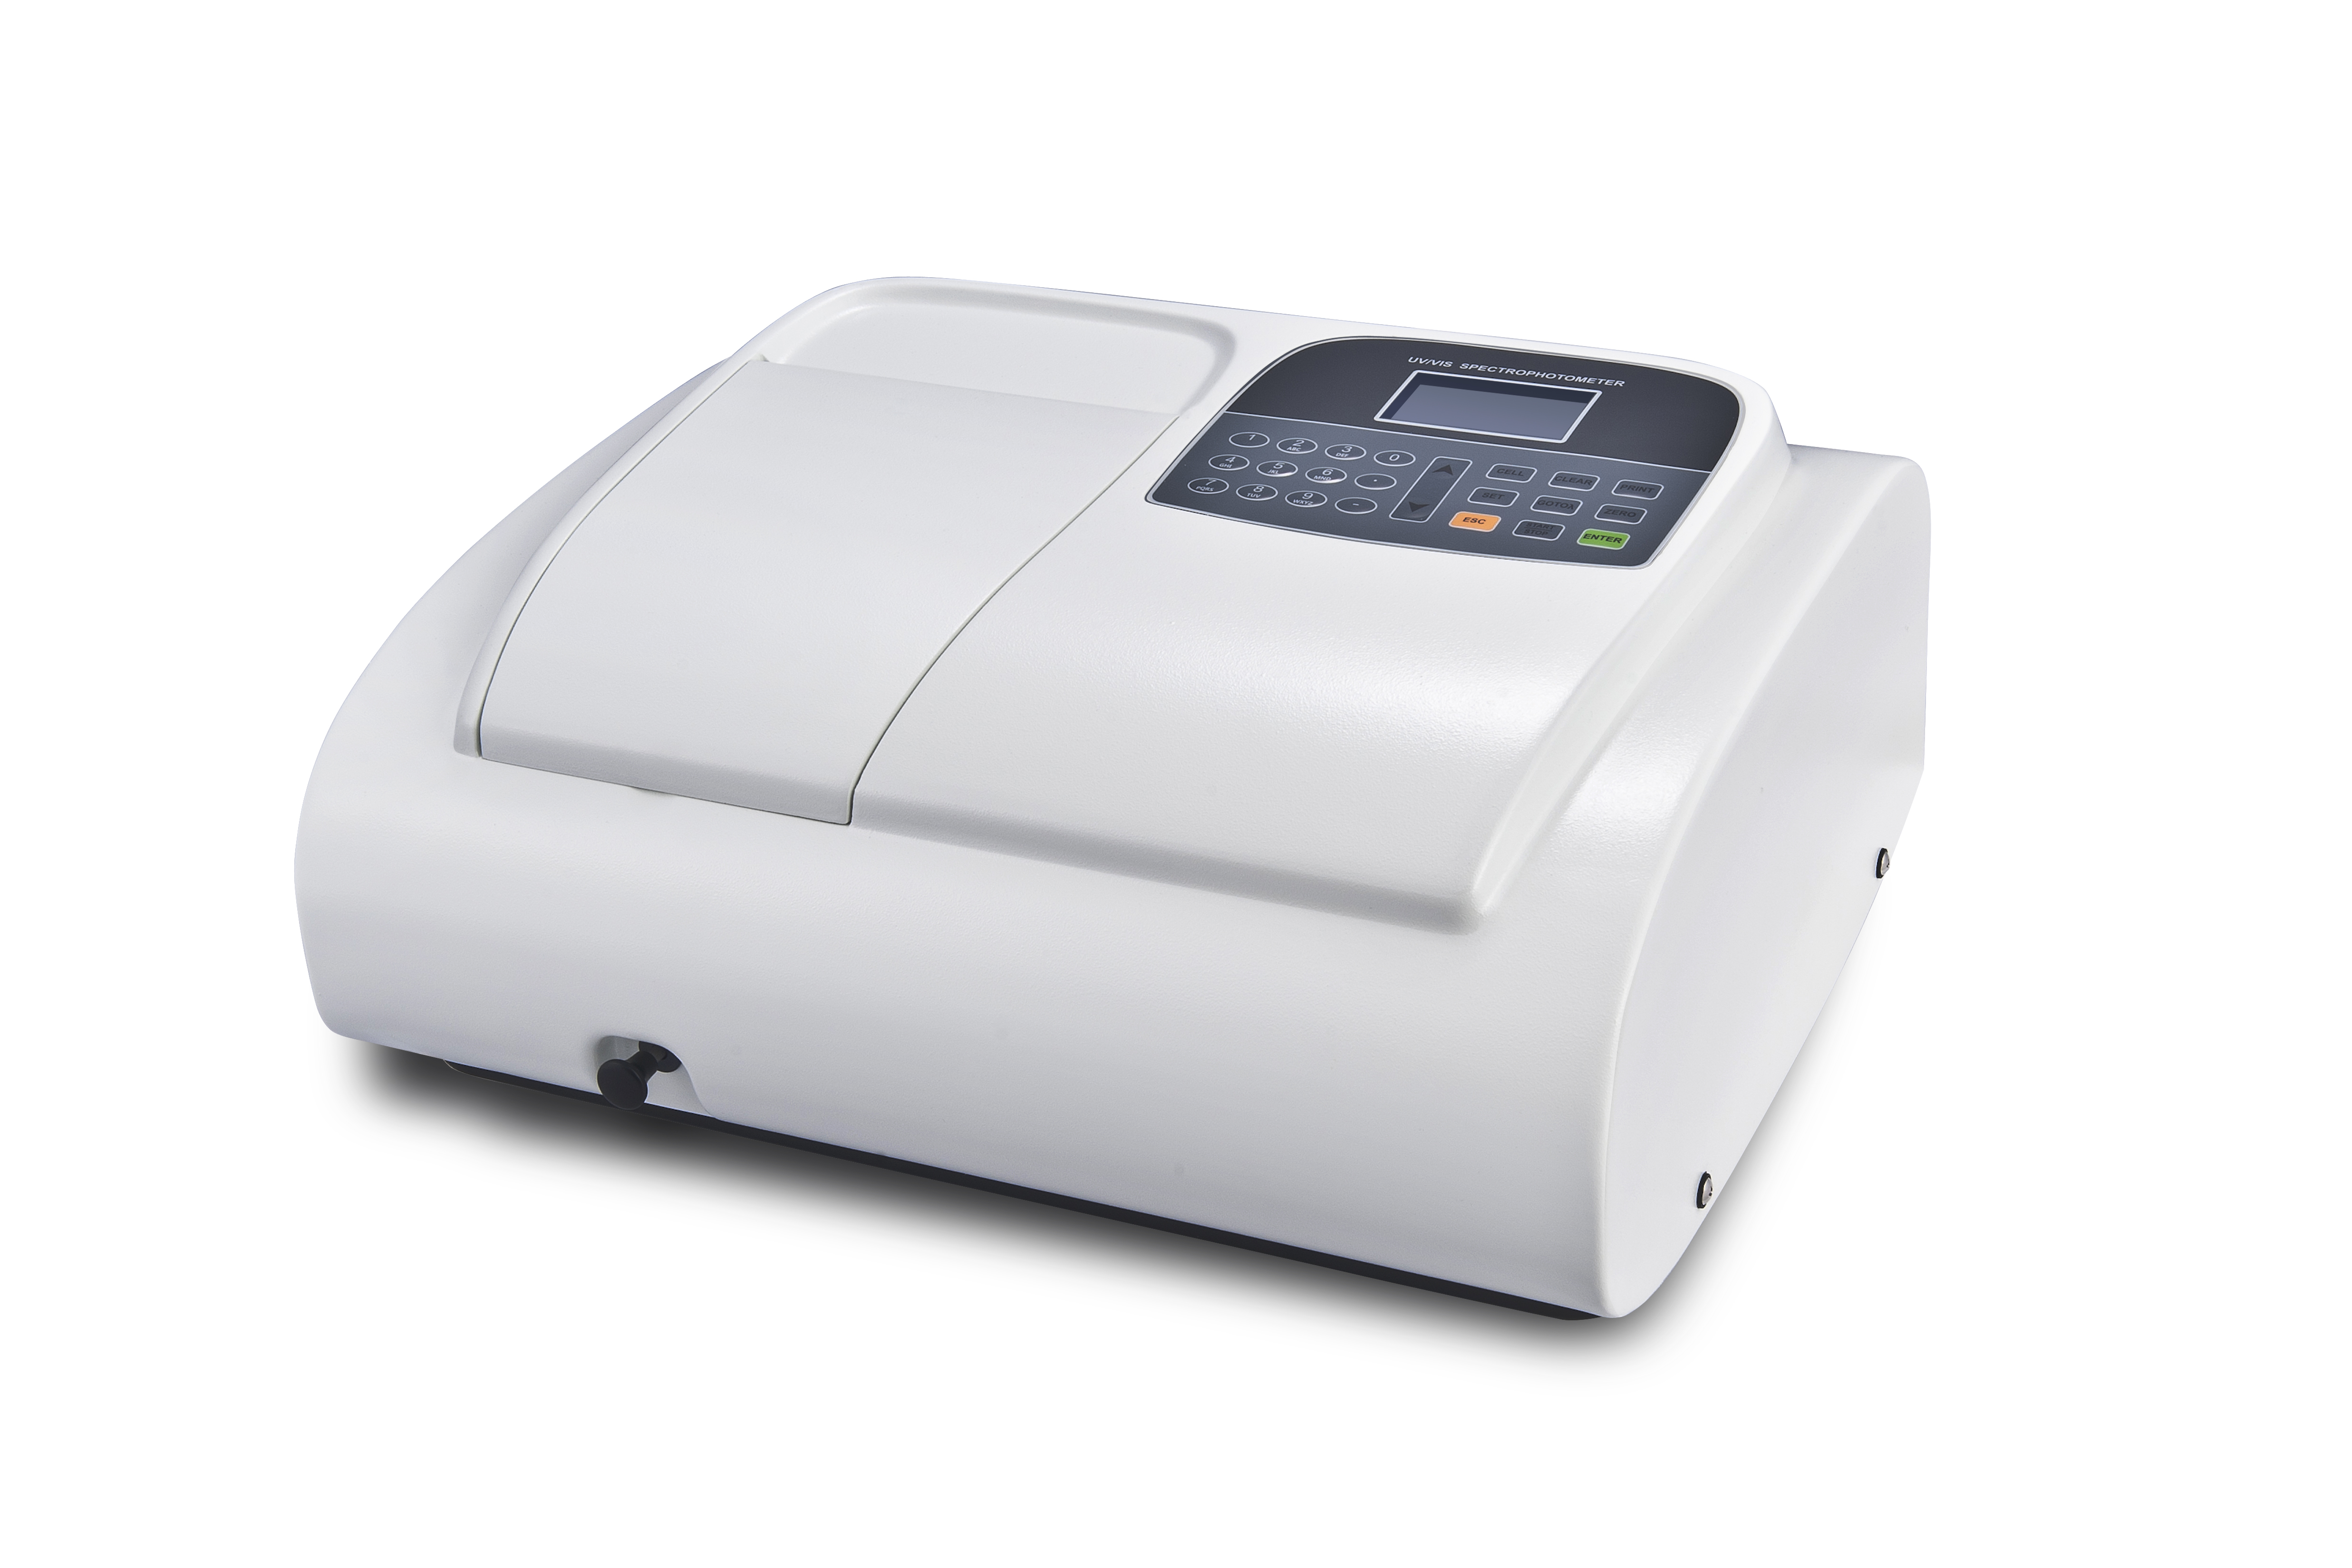 Ms-UV7800 Clinical Lab Equipment Large LCD Scanning Double Beam Spectrophotometer